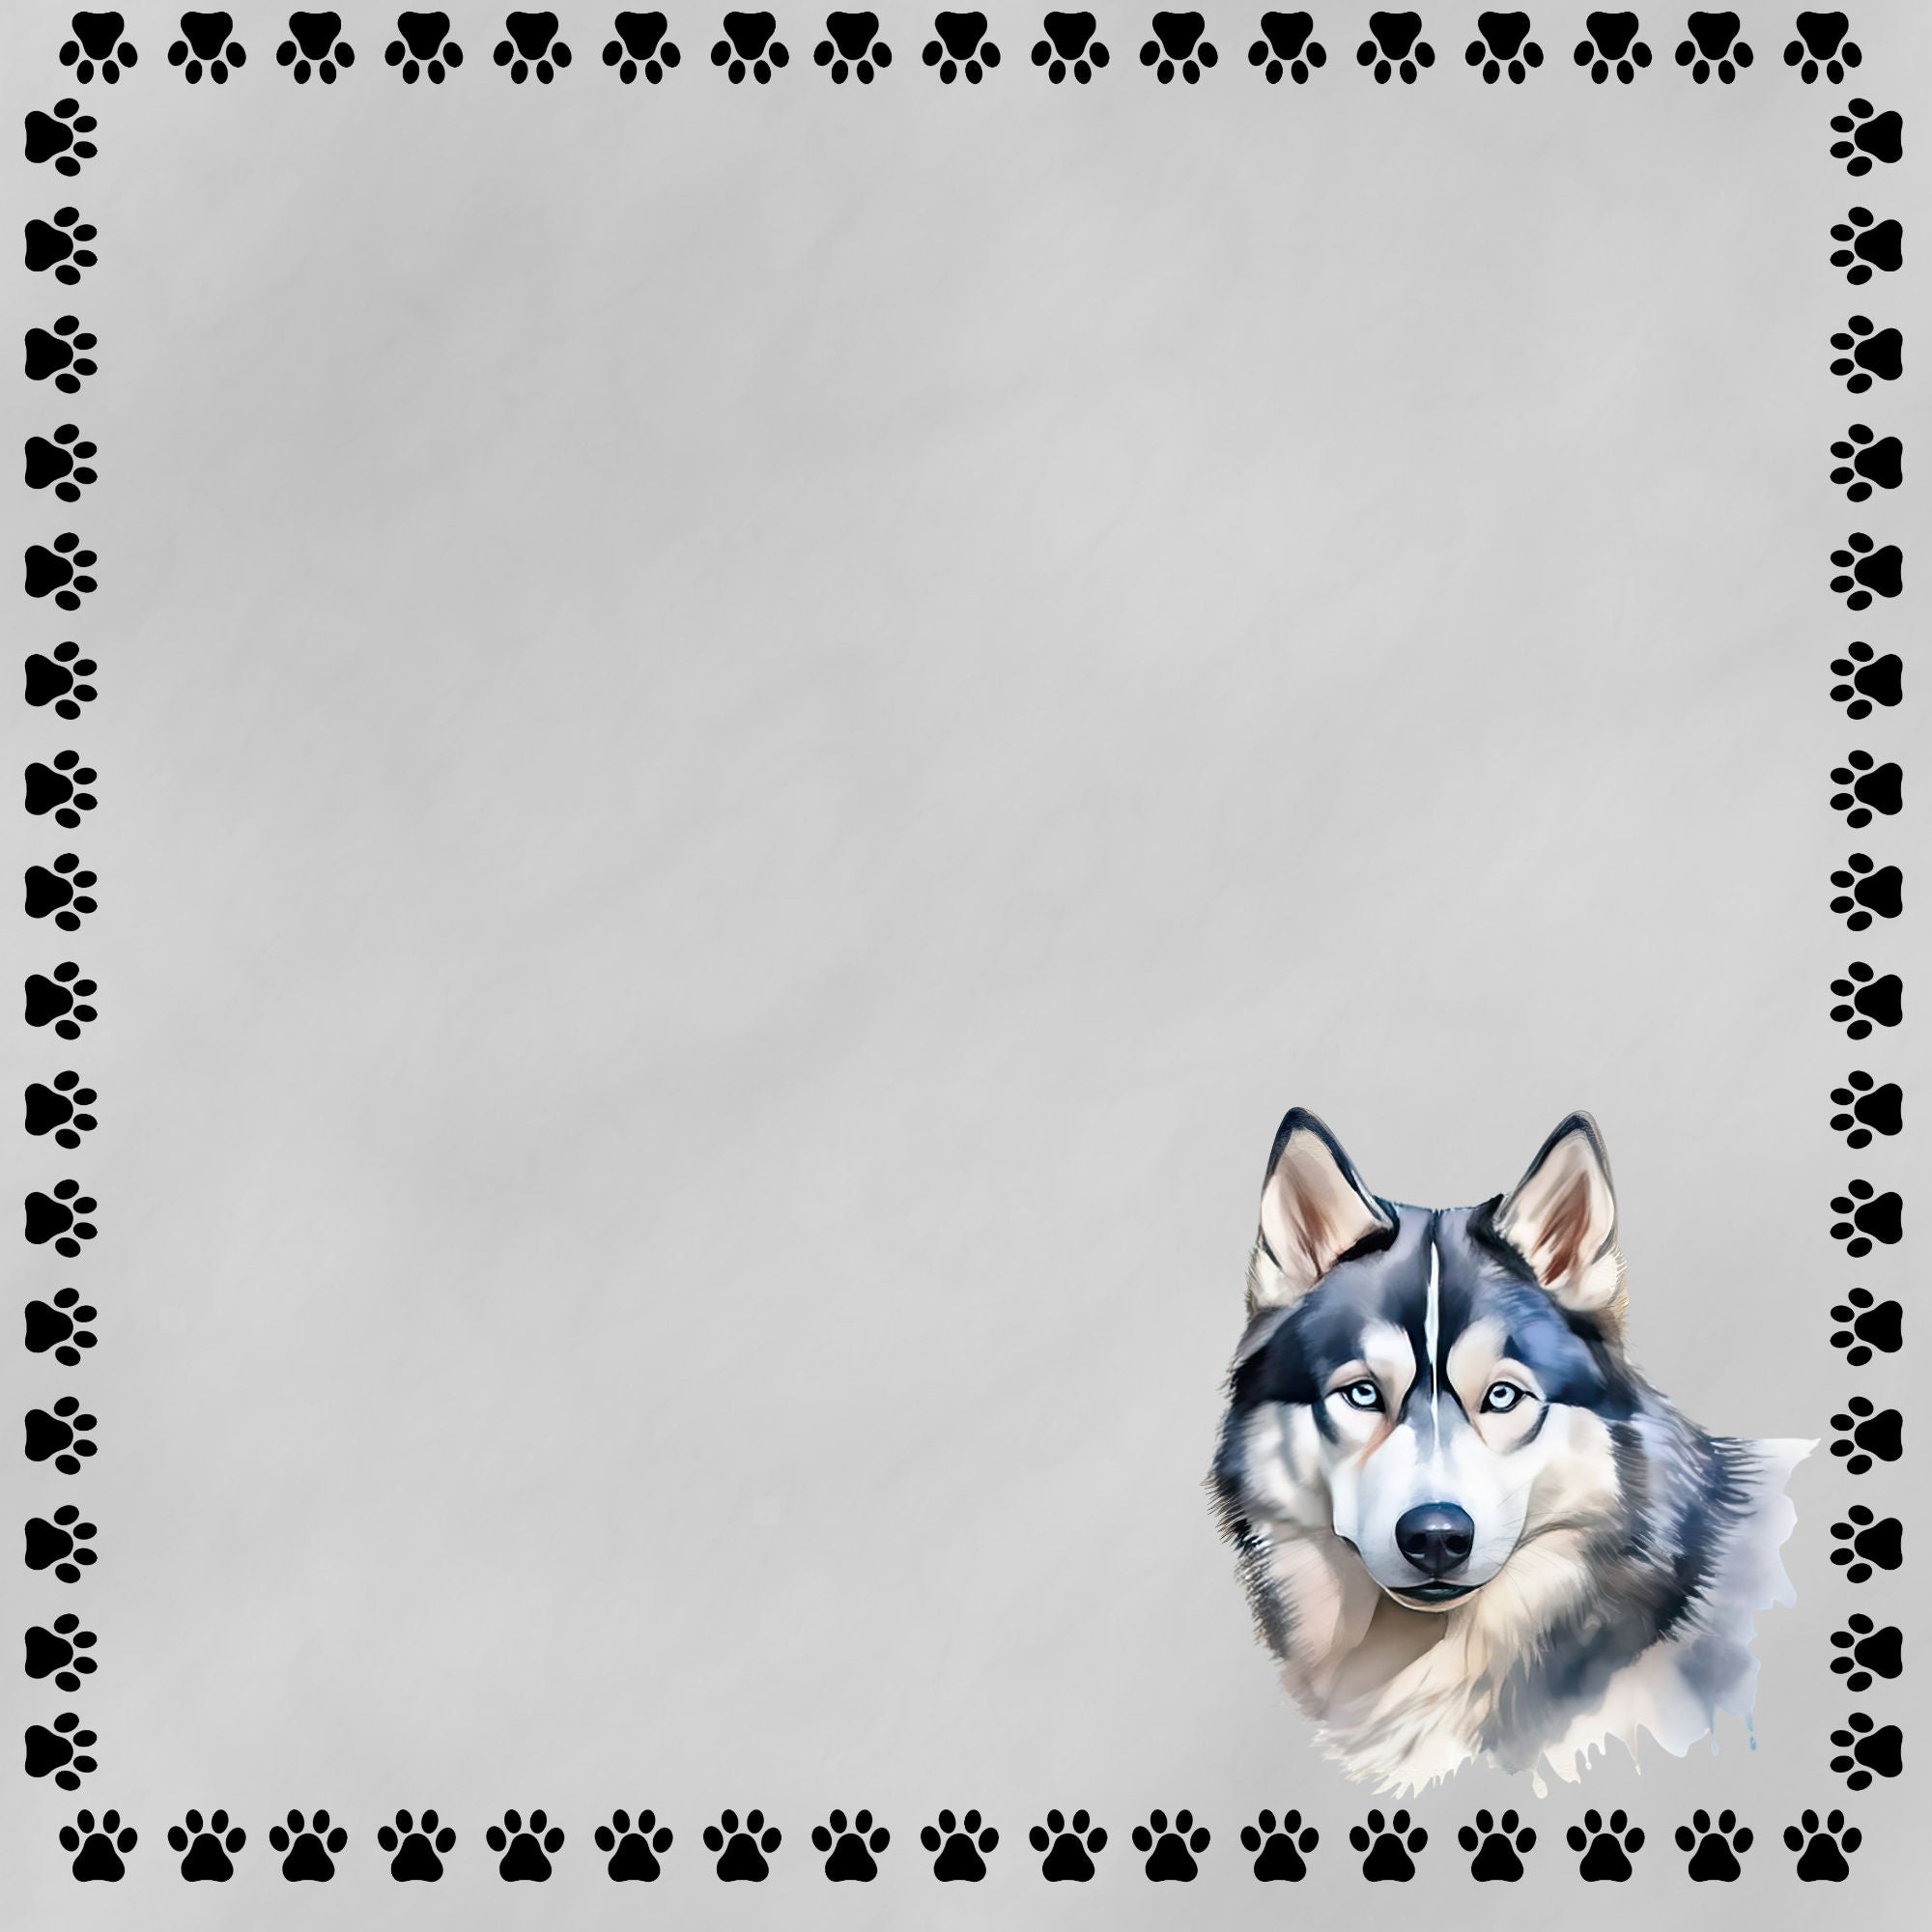 Dog Breeds Collection Husky 12 x 12 Double-Sided Scrapbook Paper by SSC Designs